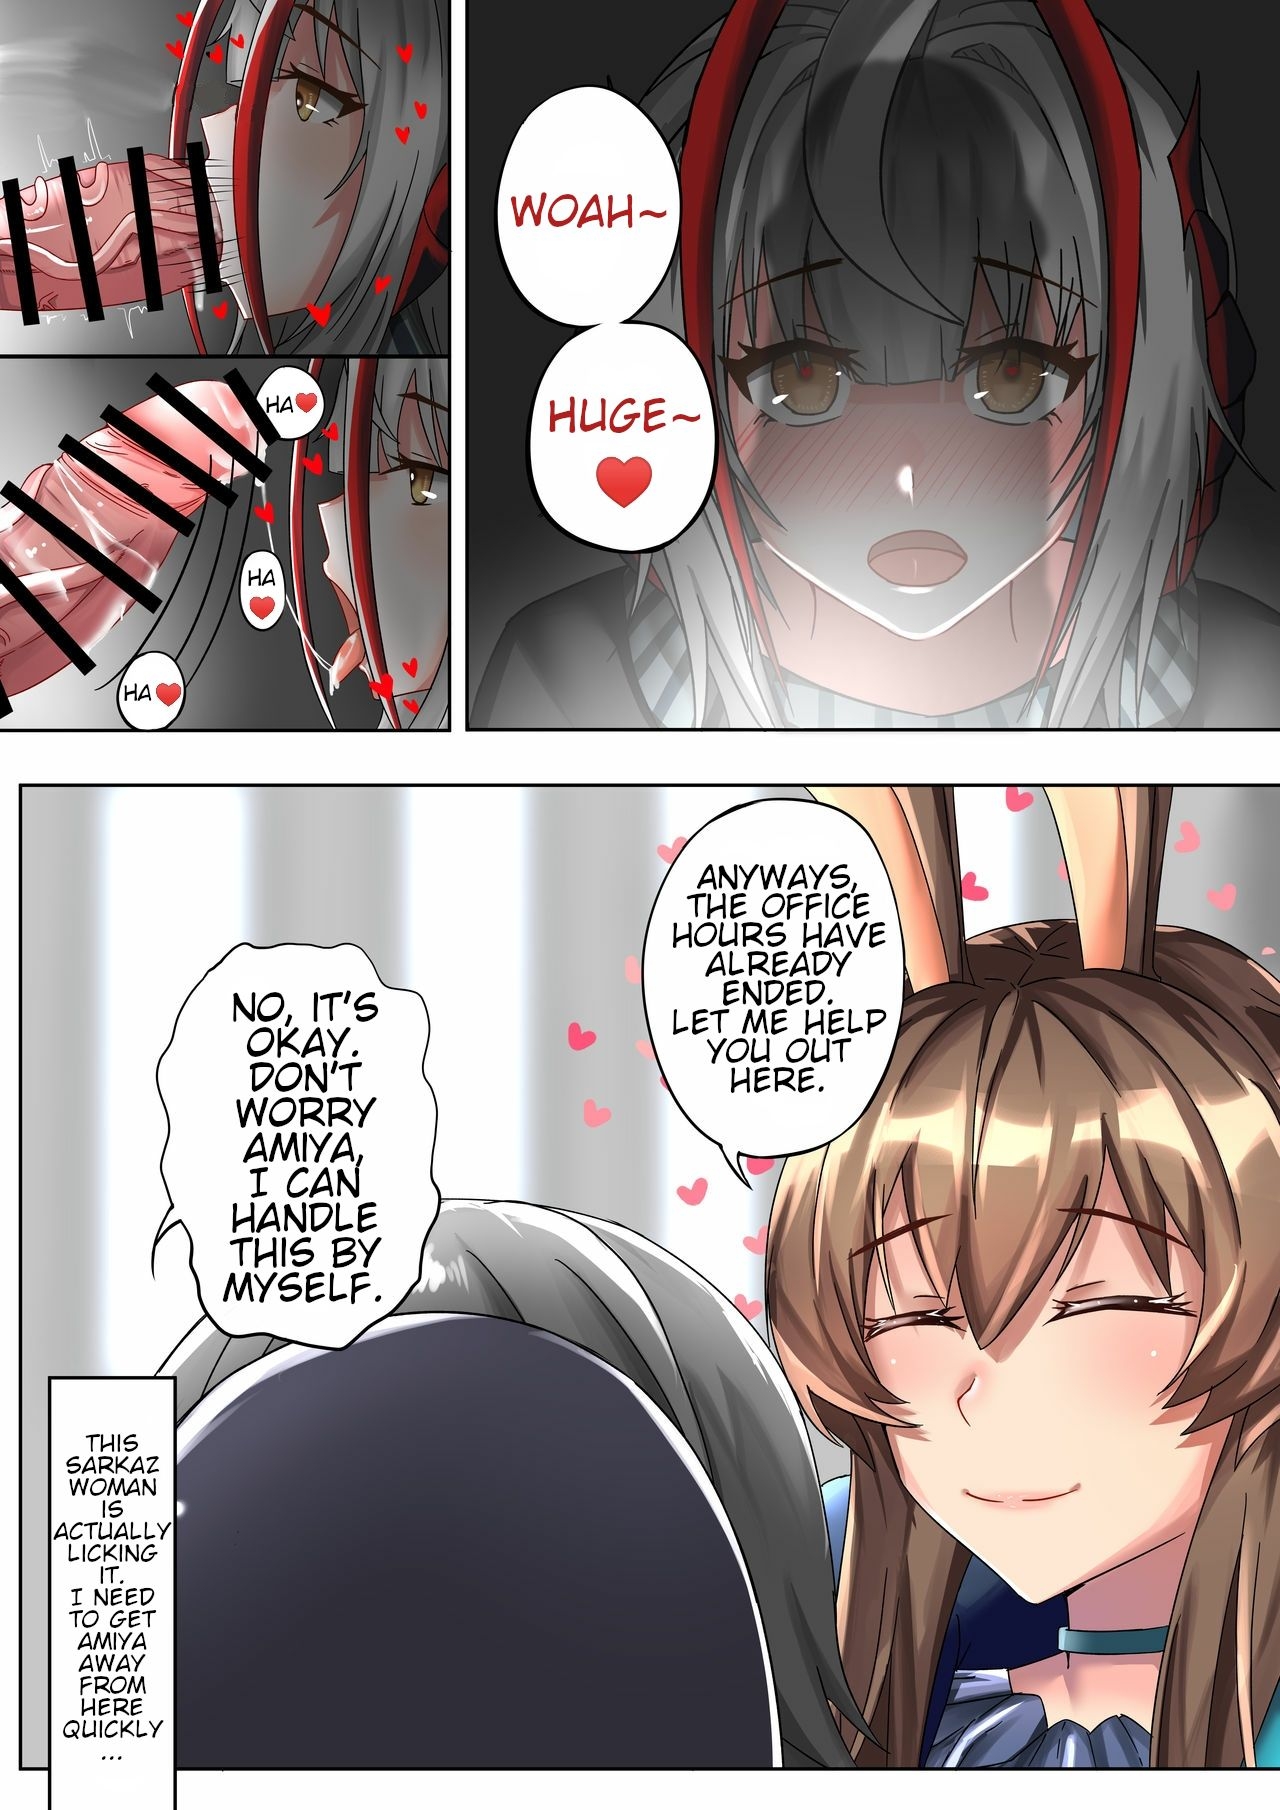 [TRNR] The one who is evil is also the one you love (Arknights) 9